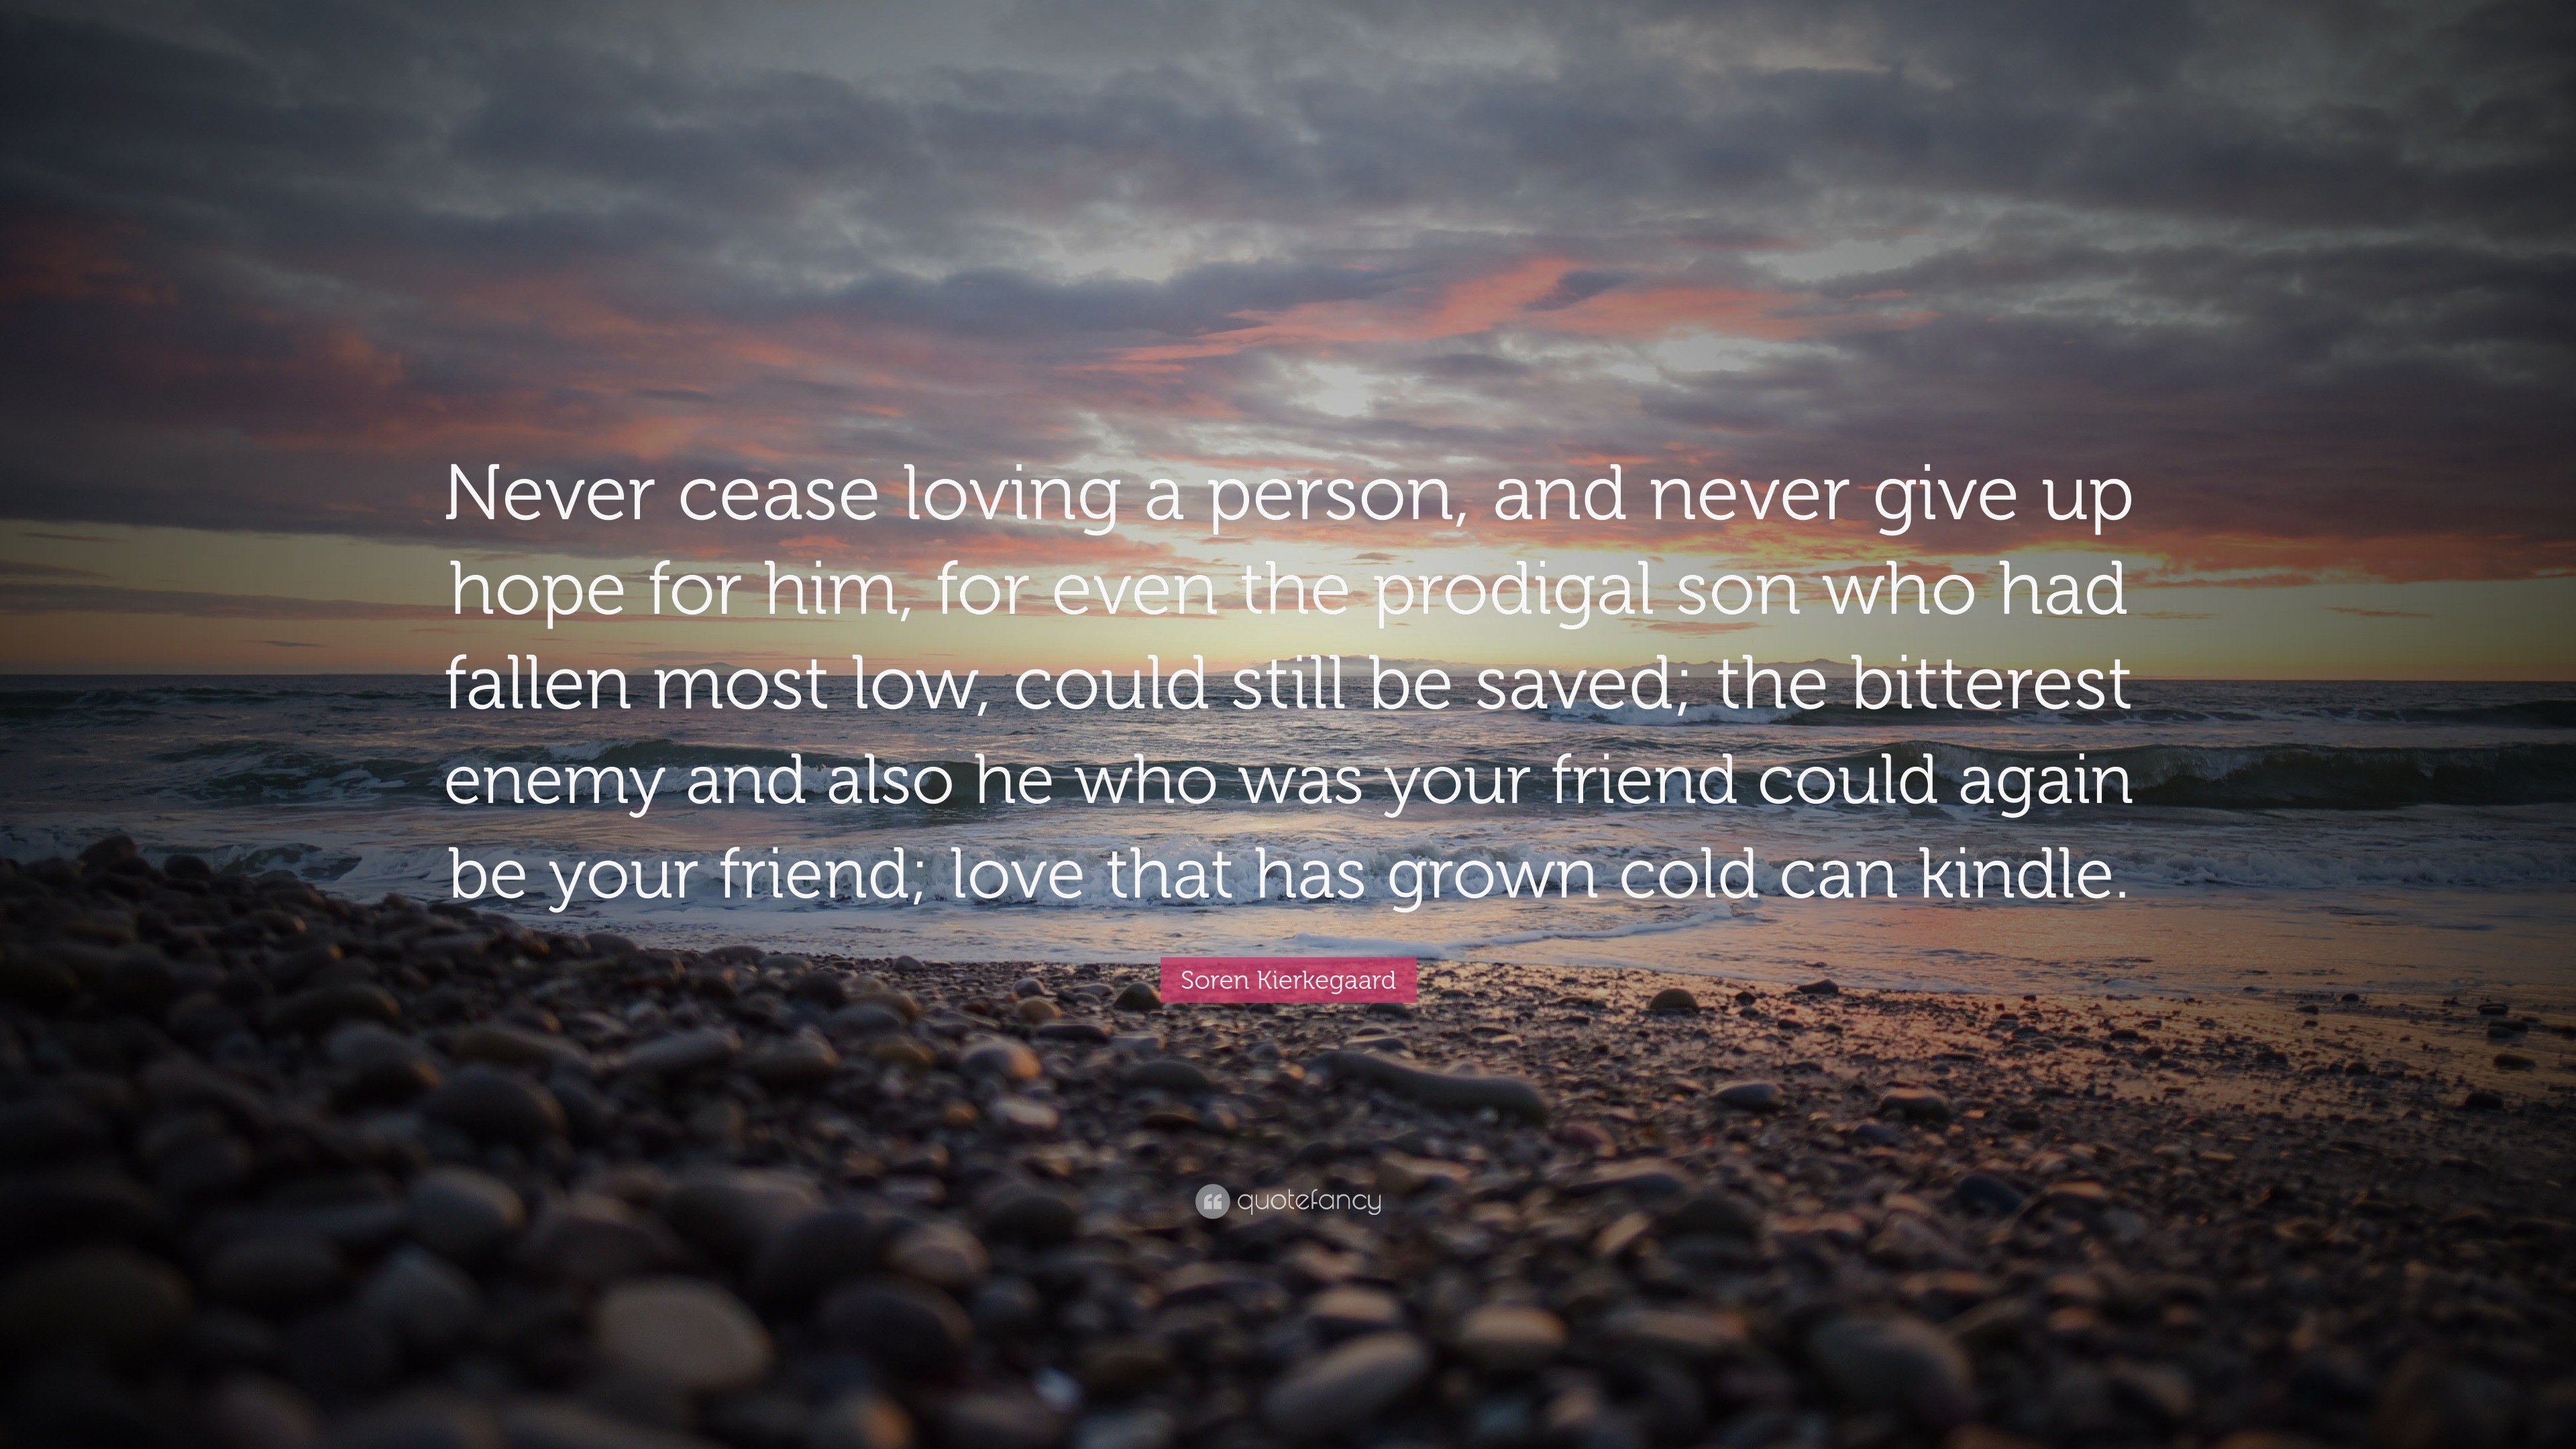 Soren Kierkegaard Quote “Never cease loving a person and never give up hope